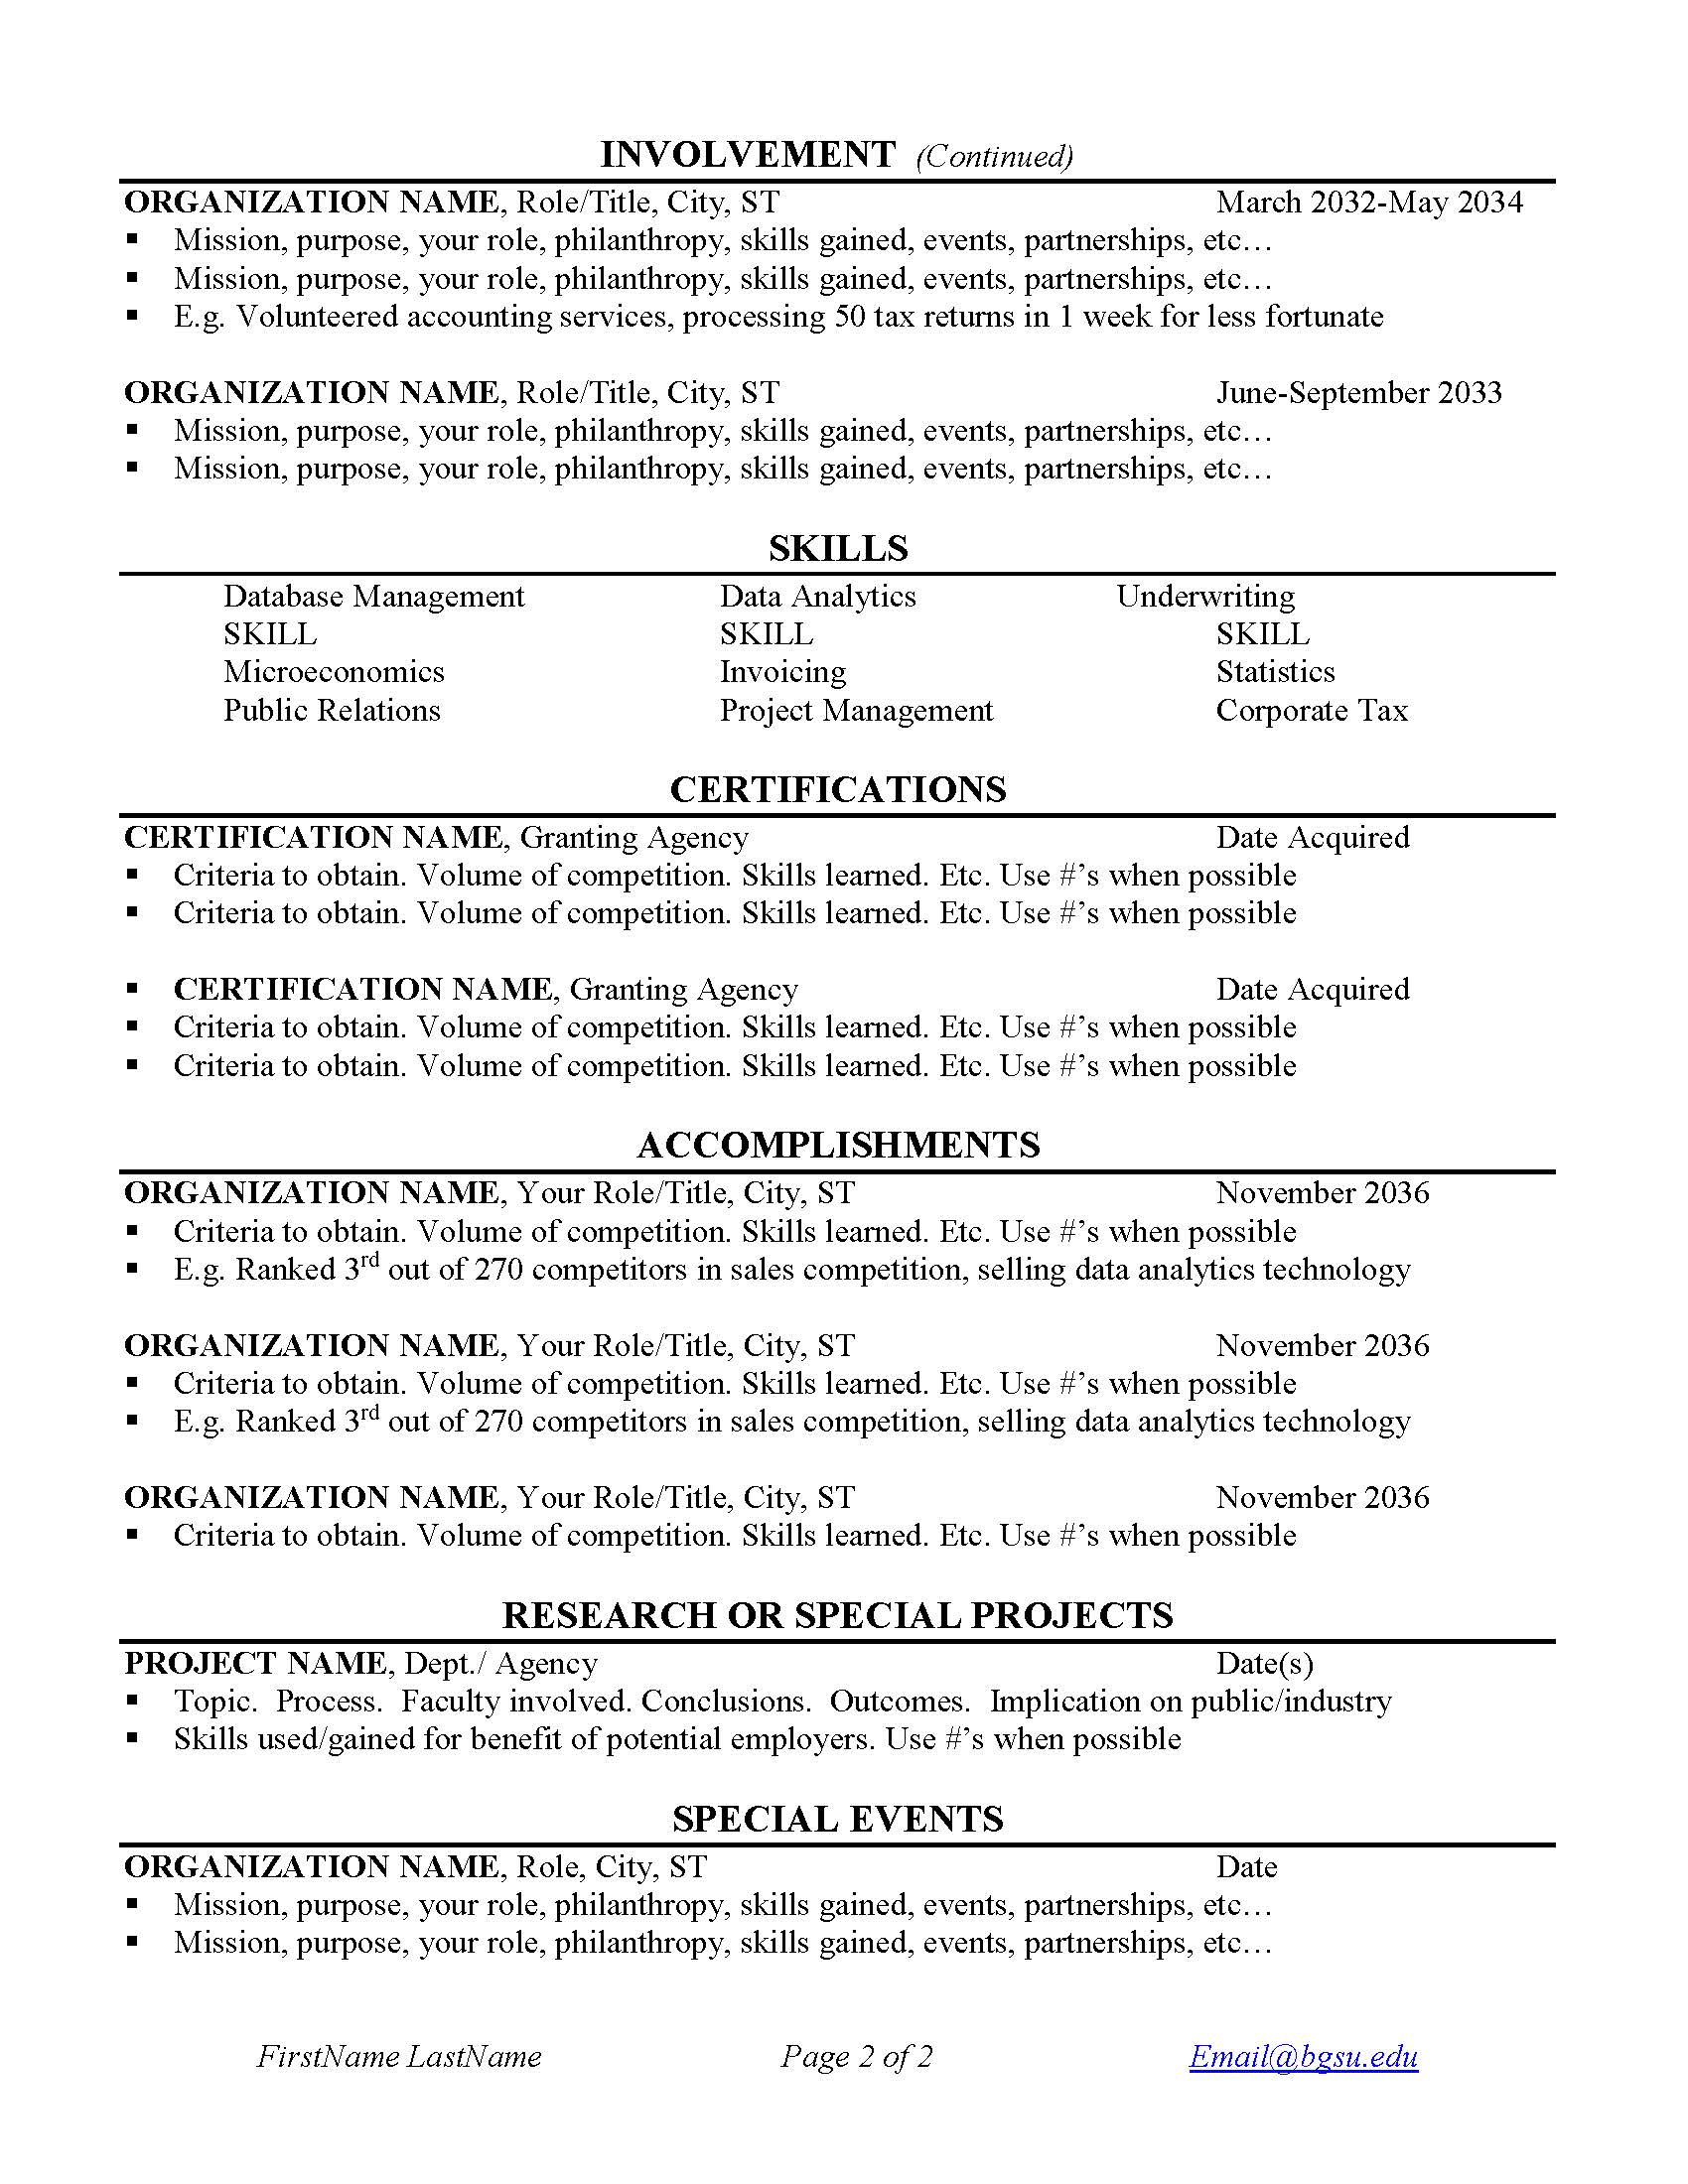 ADVANCED-Resume-Outline-update-Page-2